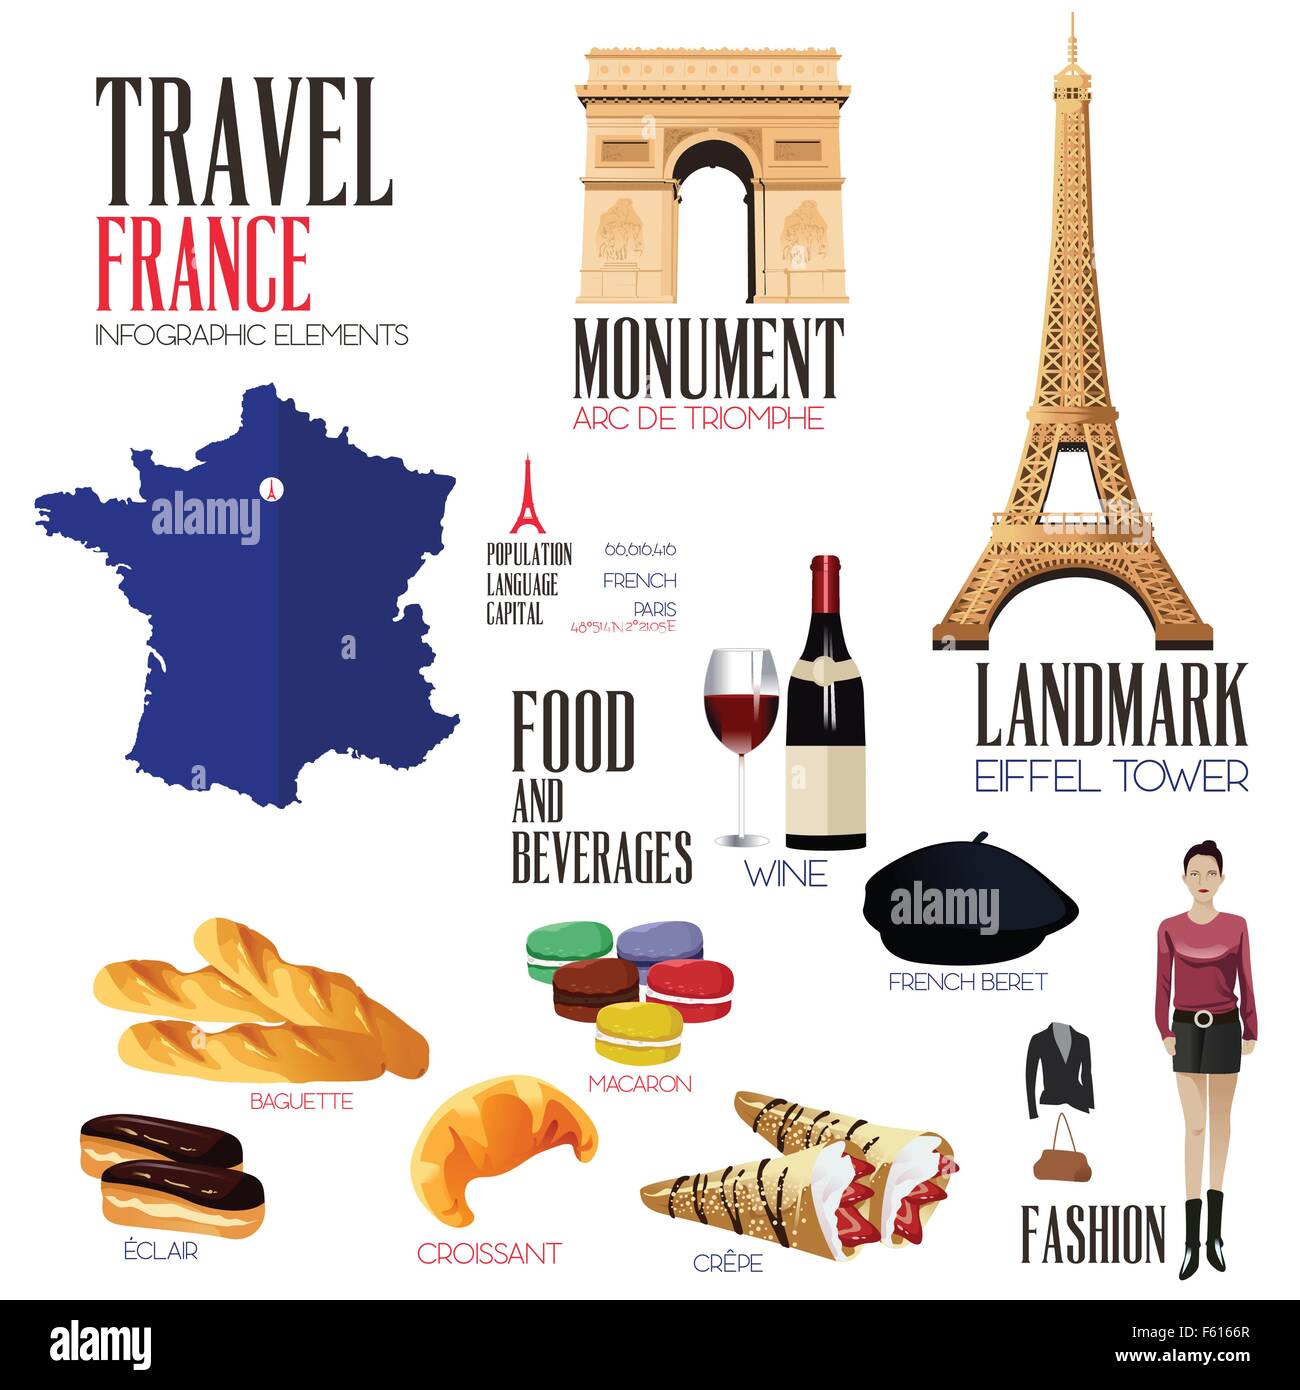 A vector illustration of Infographic elements for traveling to France Stock Vector